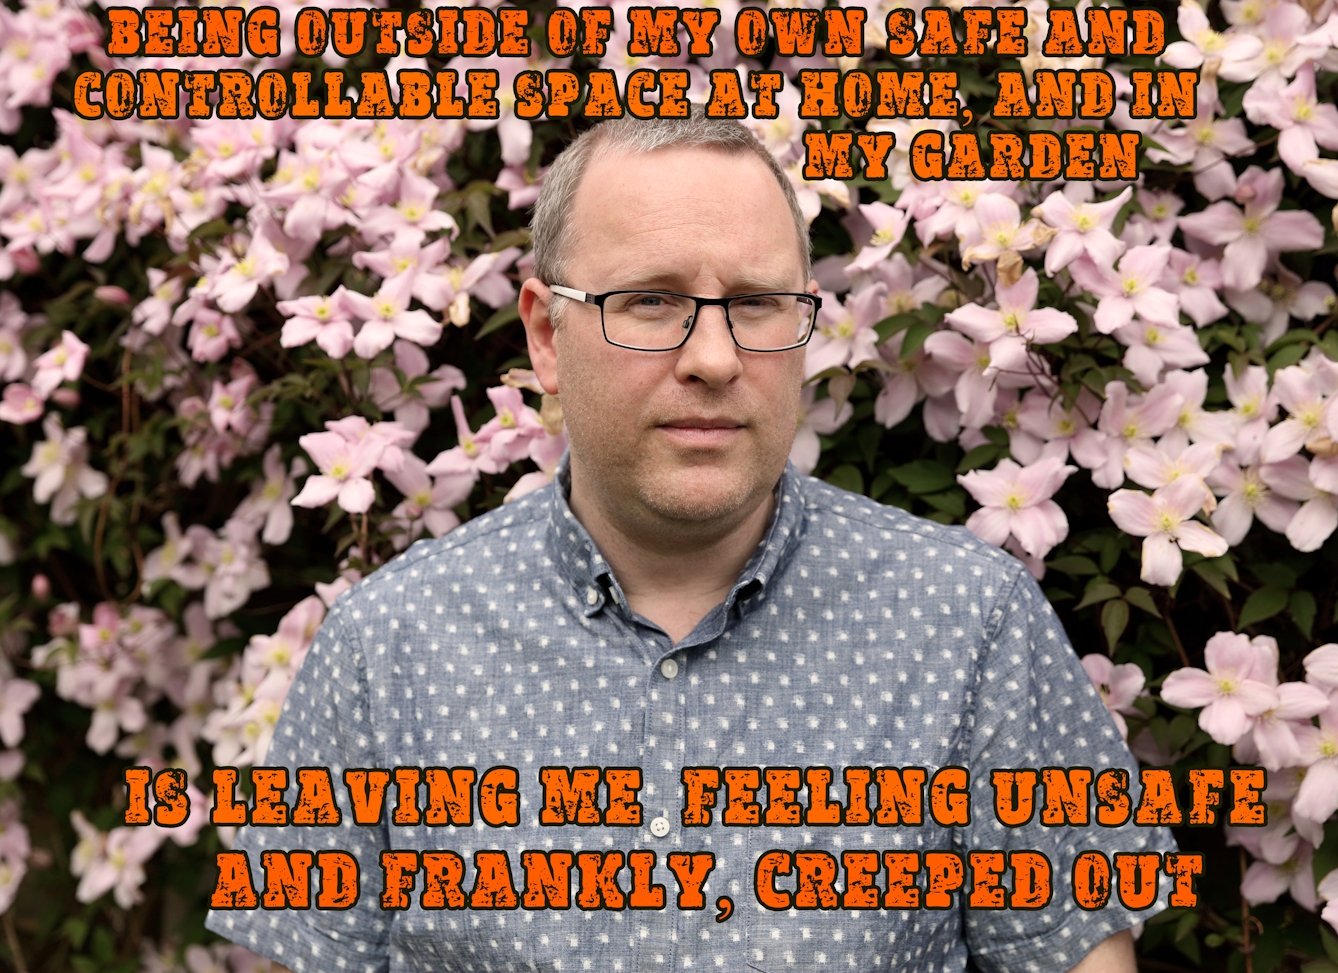 Photographic montage artwork showing a portrait of a man wearing glasses and a patterned blue shirt who is looking to camera. He is visible from the chest up and is looking to camera, head slightly turned to his left. In the background is a green bush covered in pink flowers. Digitally montaged on the image above his head, in an orange all caps font, are the words, "being outside of my own safe and controllable space at home, and in my garden", the text continues below his head, "is leaving me feeling unsafe and frankly, creeped out'.